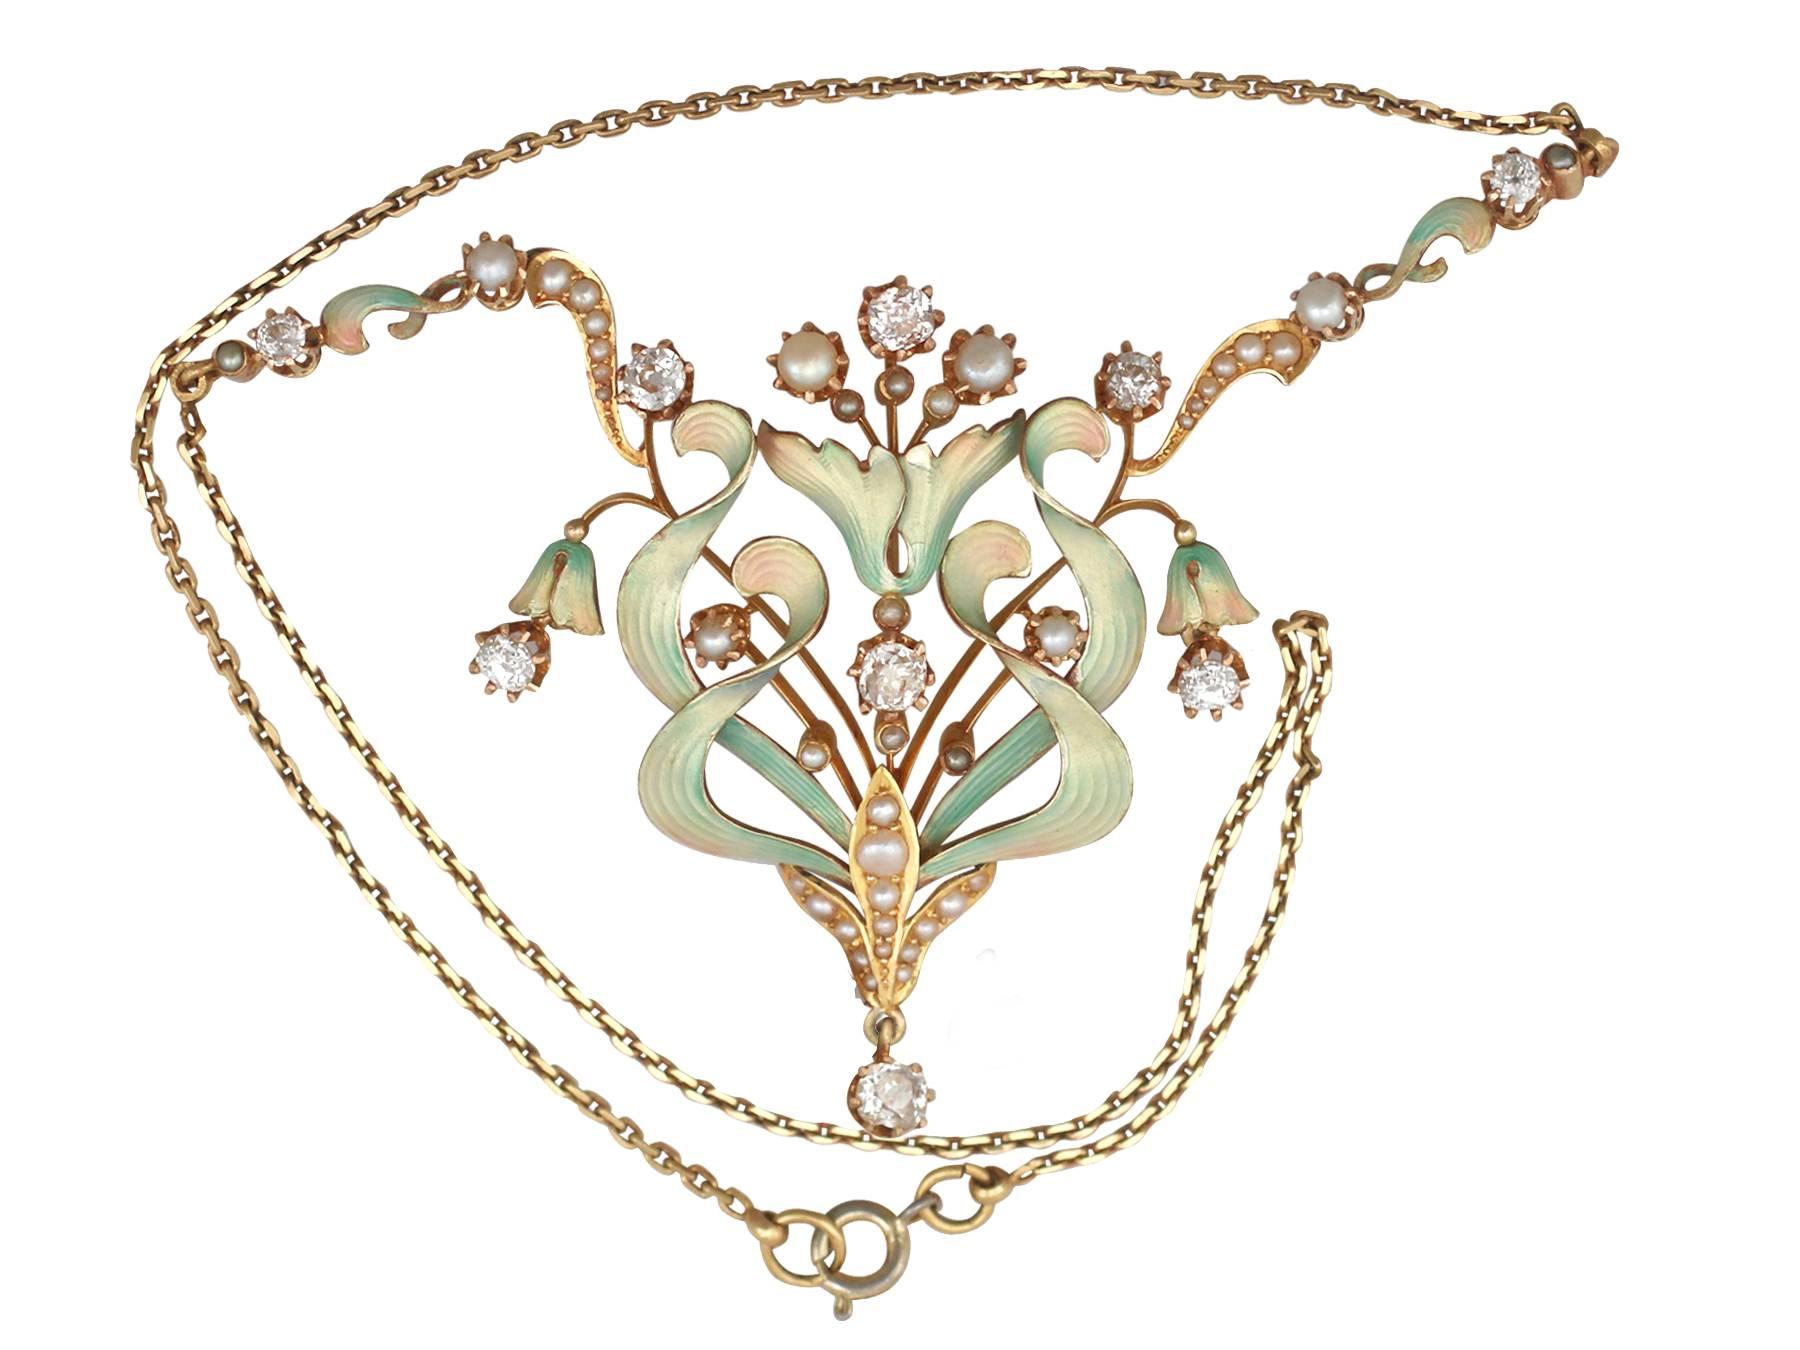 A stunning antique Art Nouveau 1.42 carat diamond and seed pearl, enamel and 15 karat yellow gold necklace; part of our diverse antique jewelry and estate jewelry collections

This stunning, fine and impressive Art Nouveau antique necklace has been